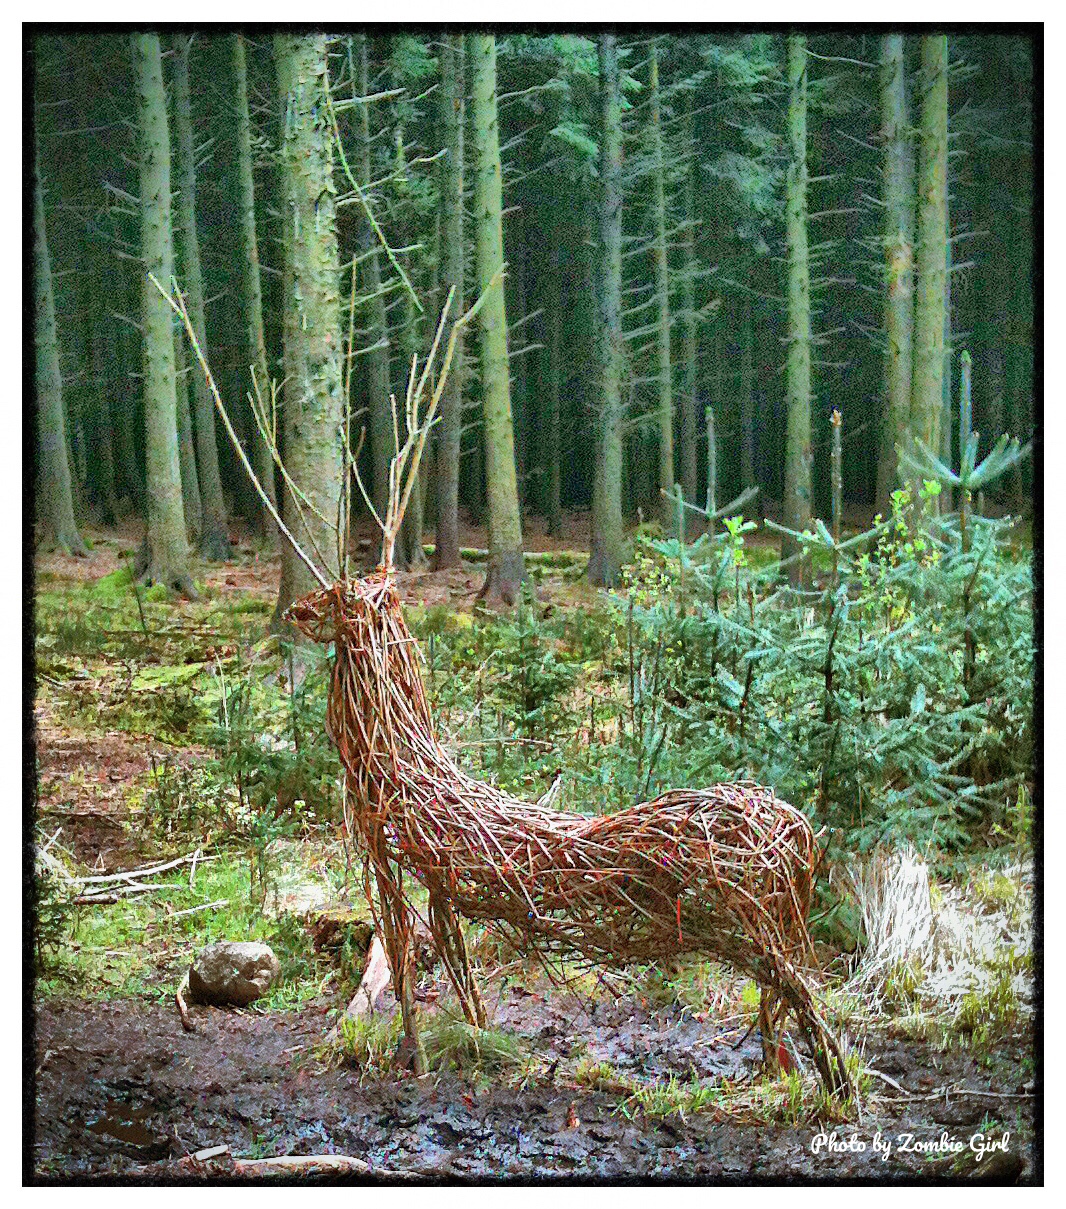 Living art work of a deer in the forest